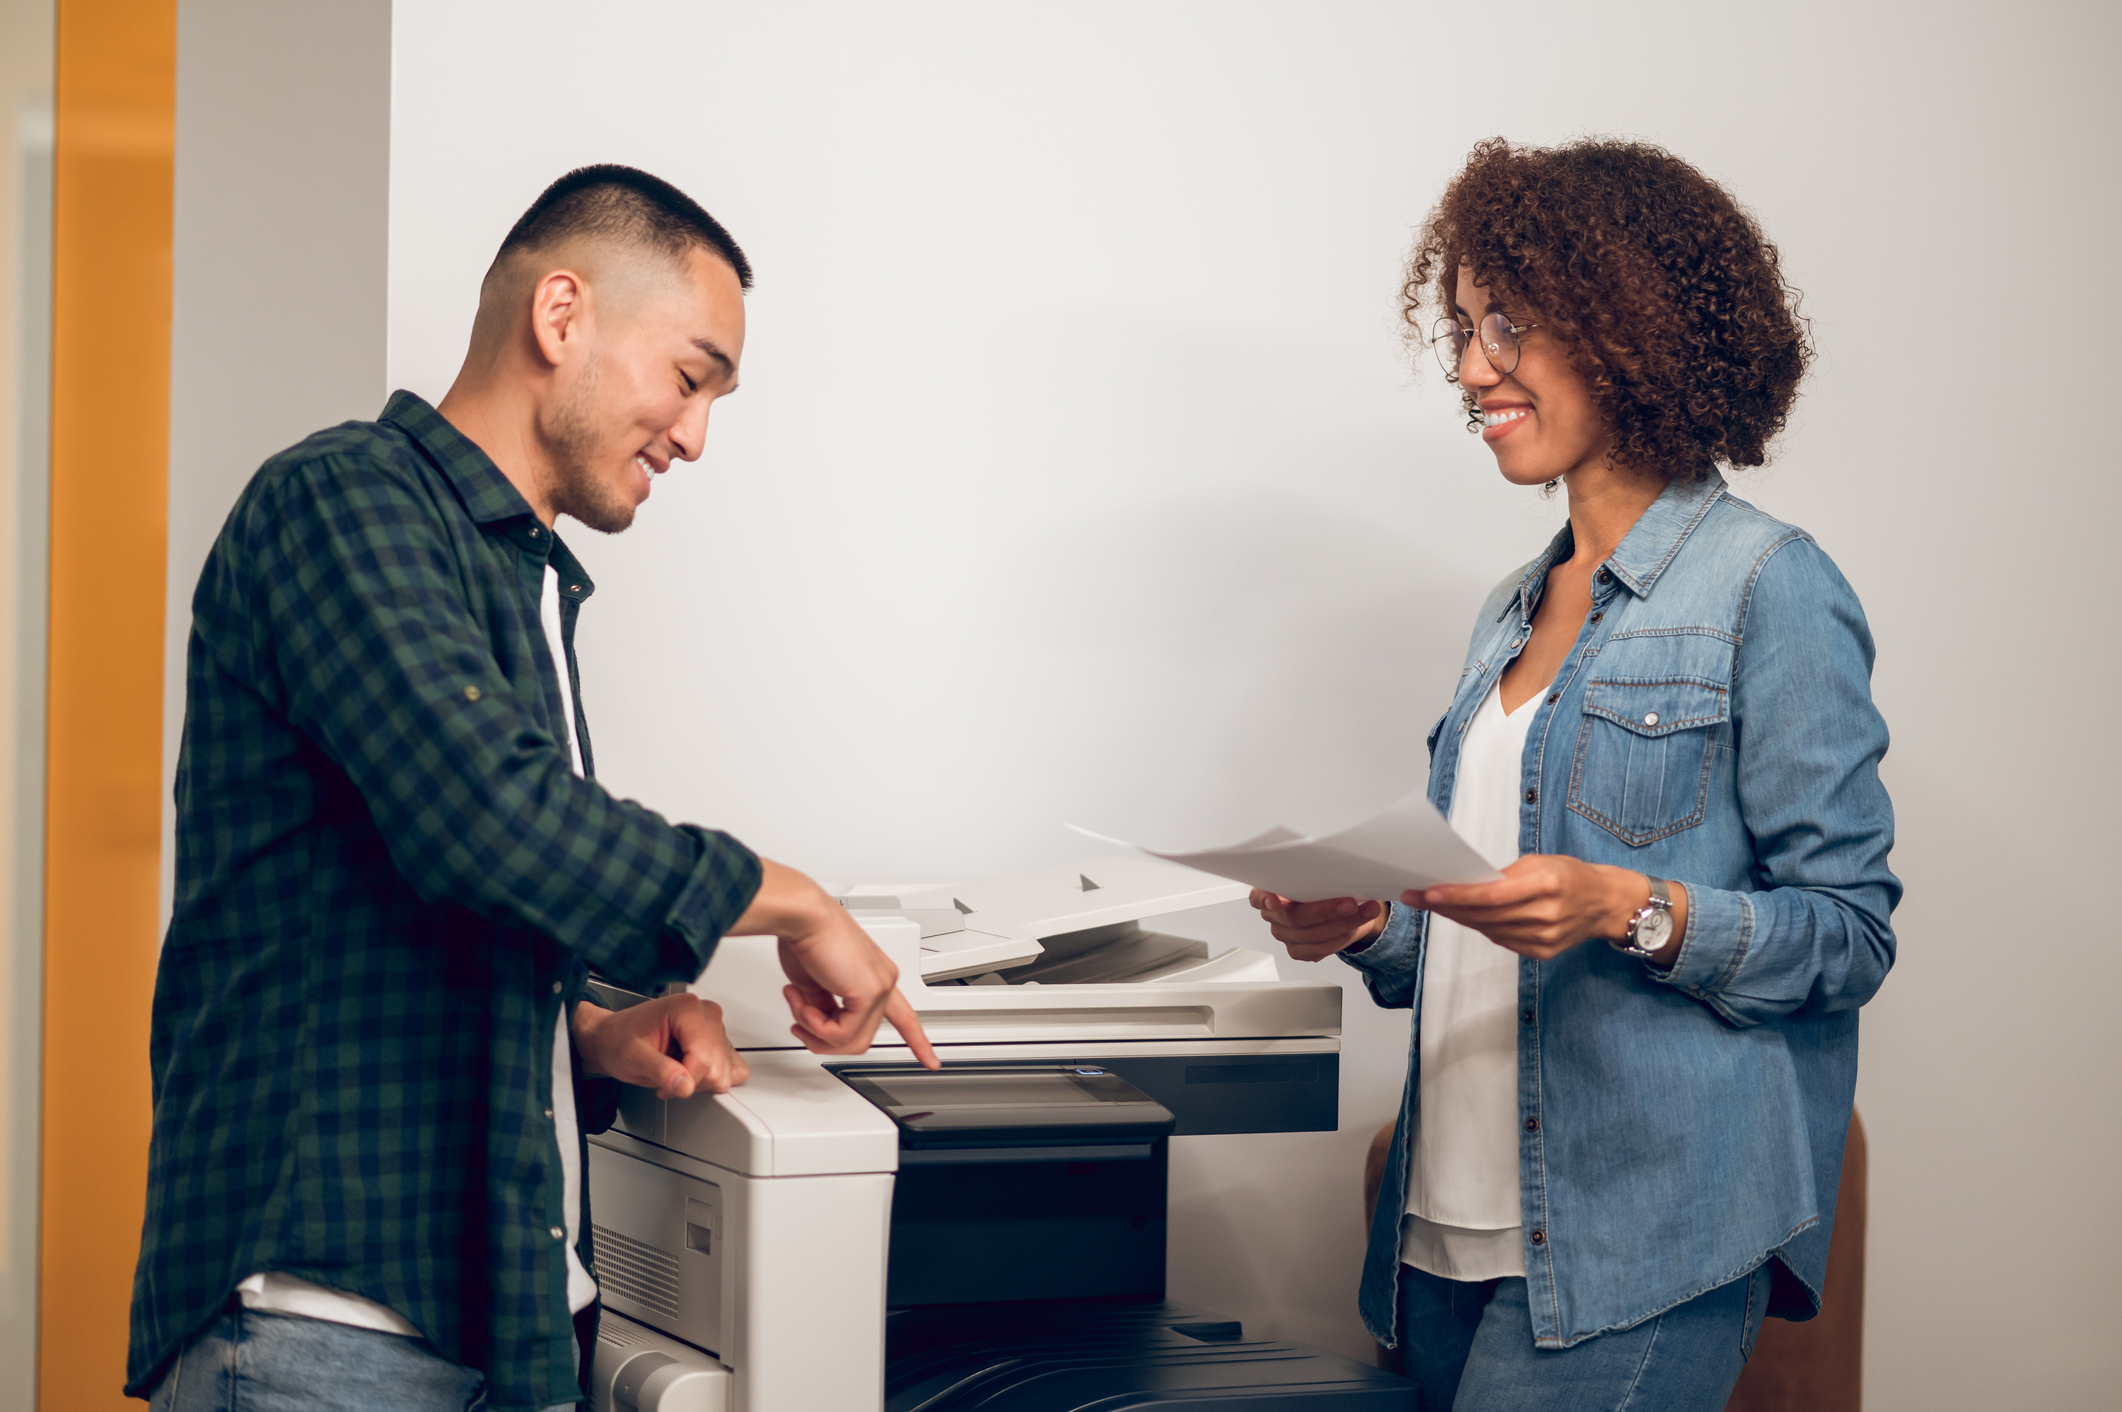 Two colleagues at an office copier